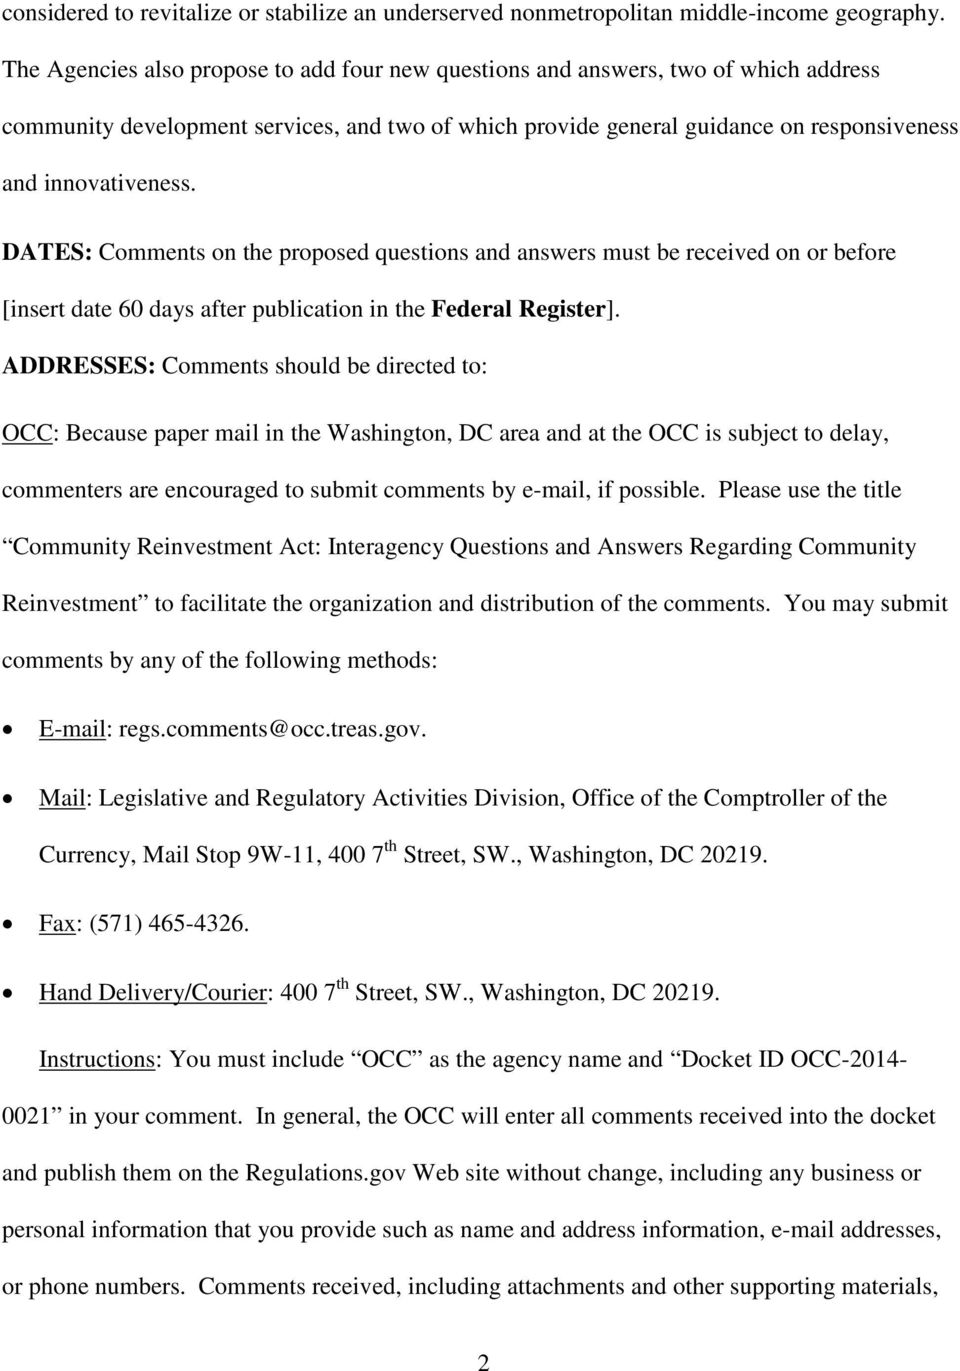 DATES: Comments on the proposed questions and answers must be received on or before [insert date 60 days after publication in the Federal Register].